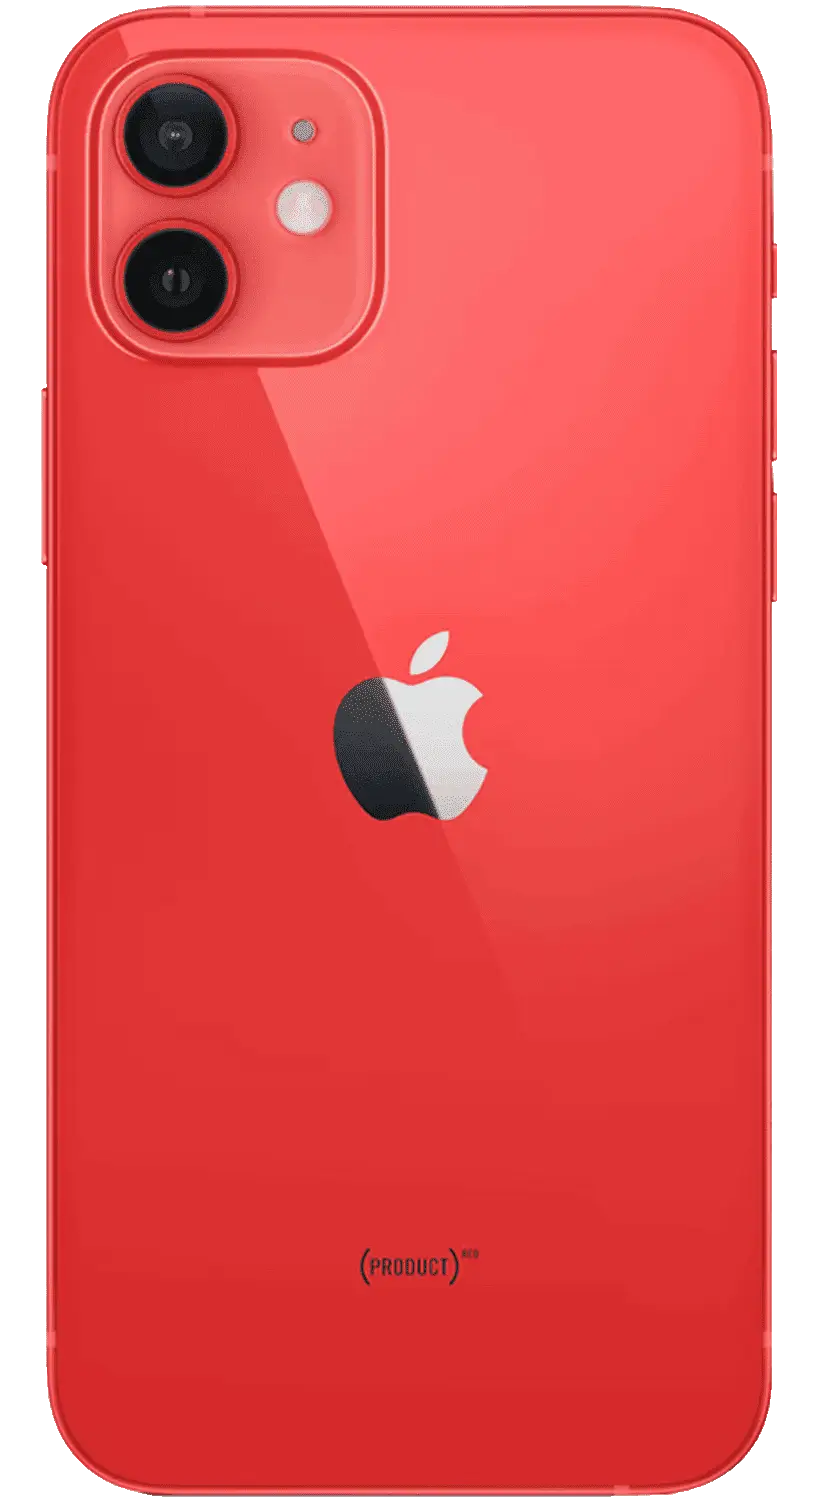 iphone 12s front